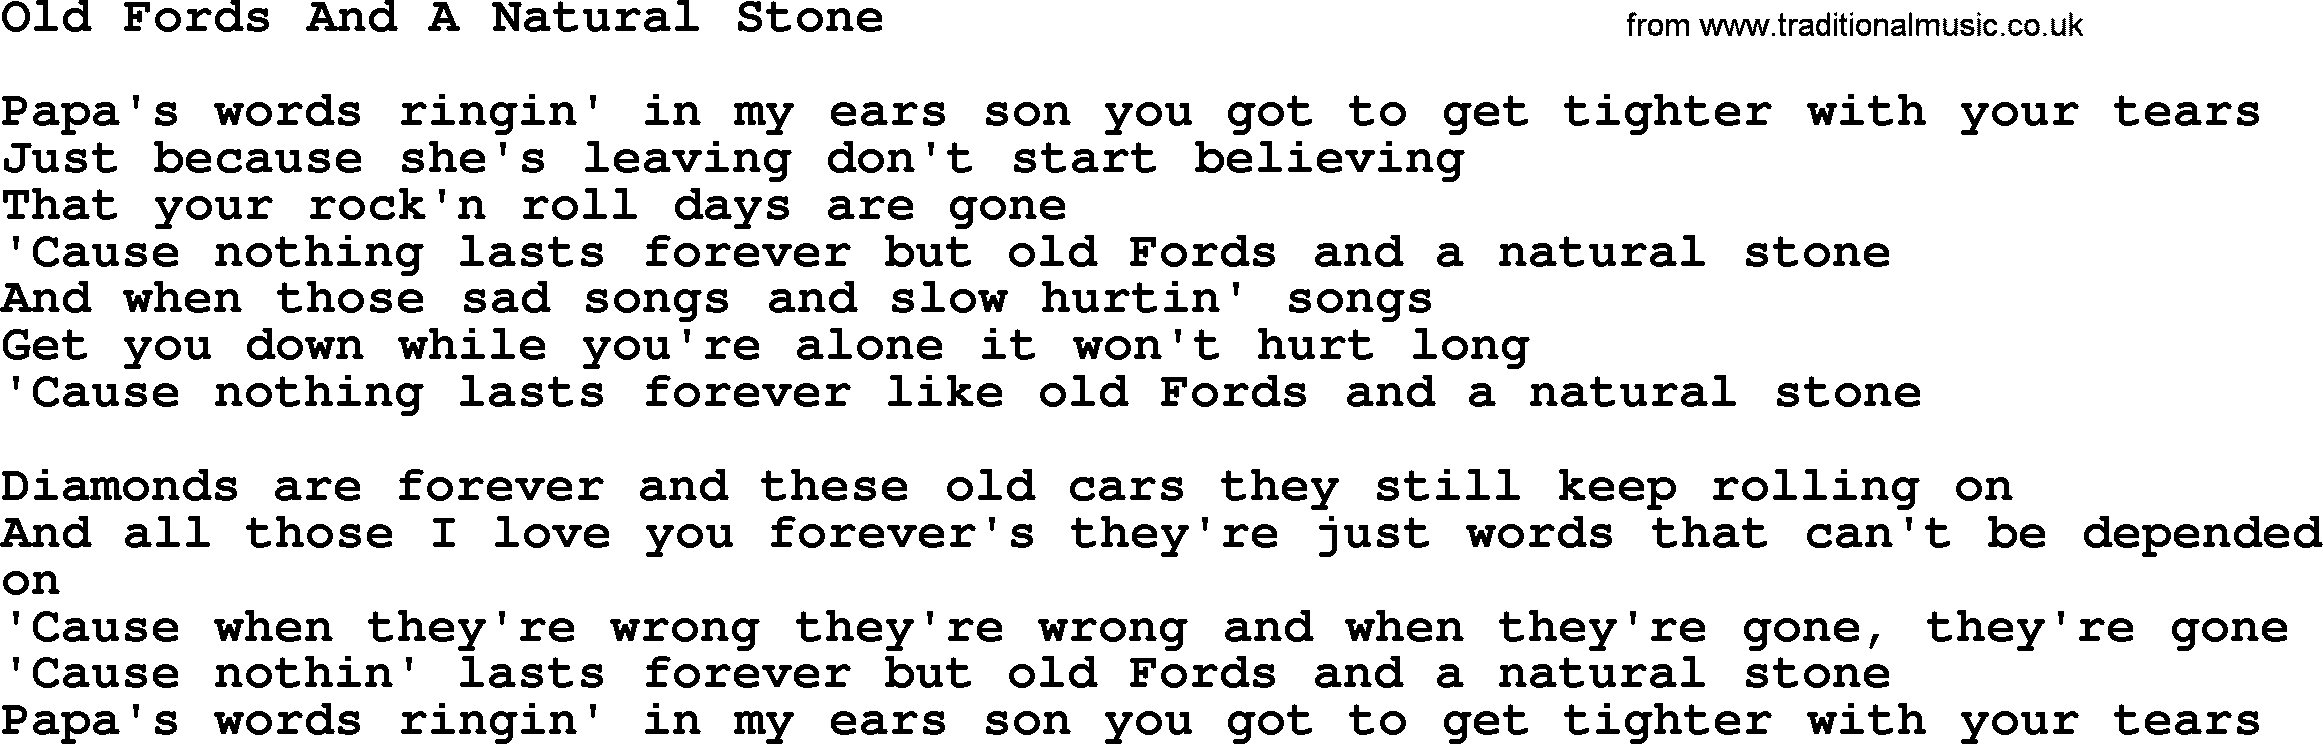 Willie Nelson song: Old Fords And A Natural Stone lyrics